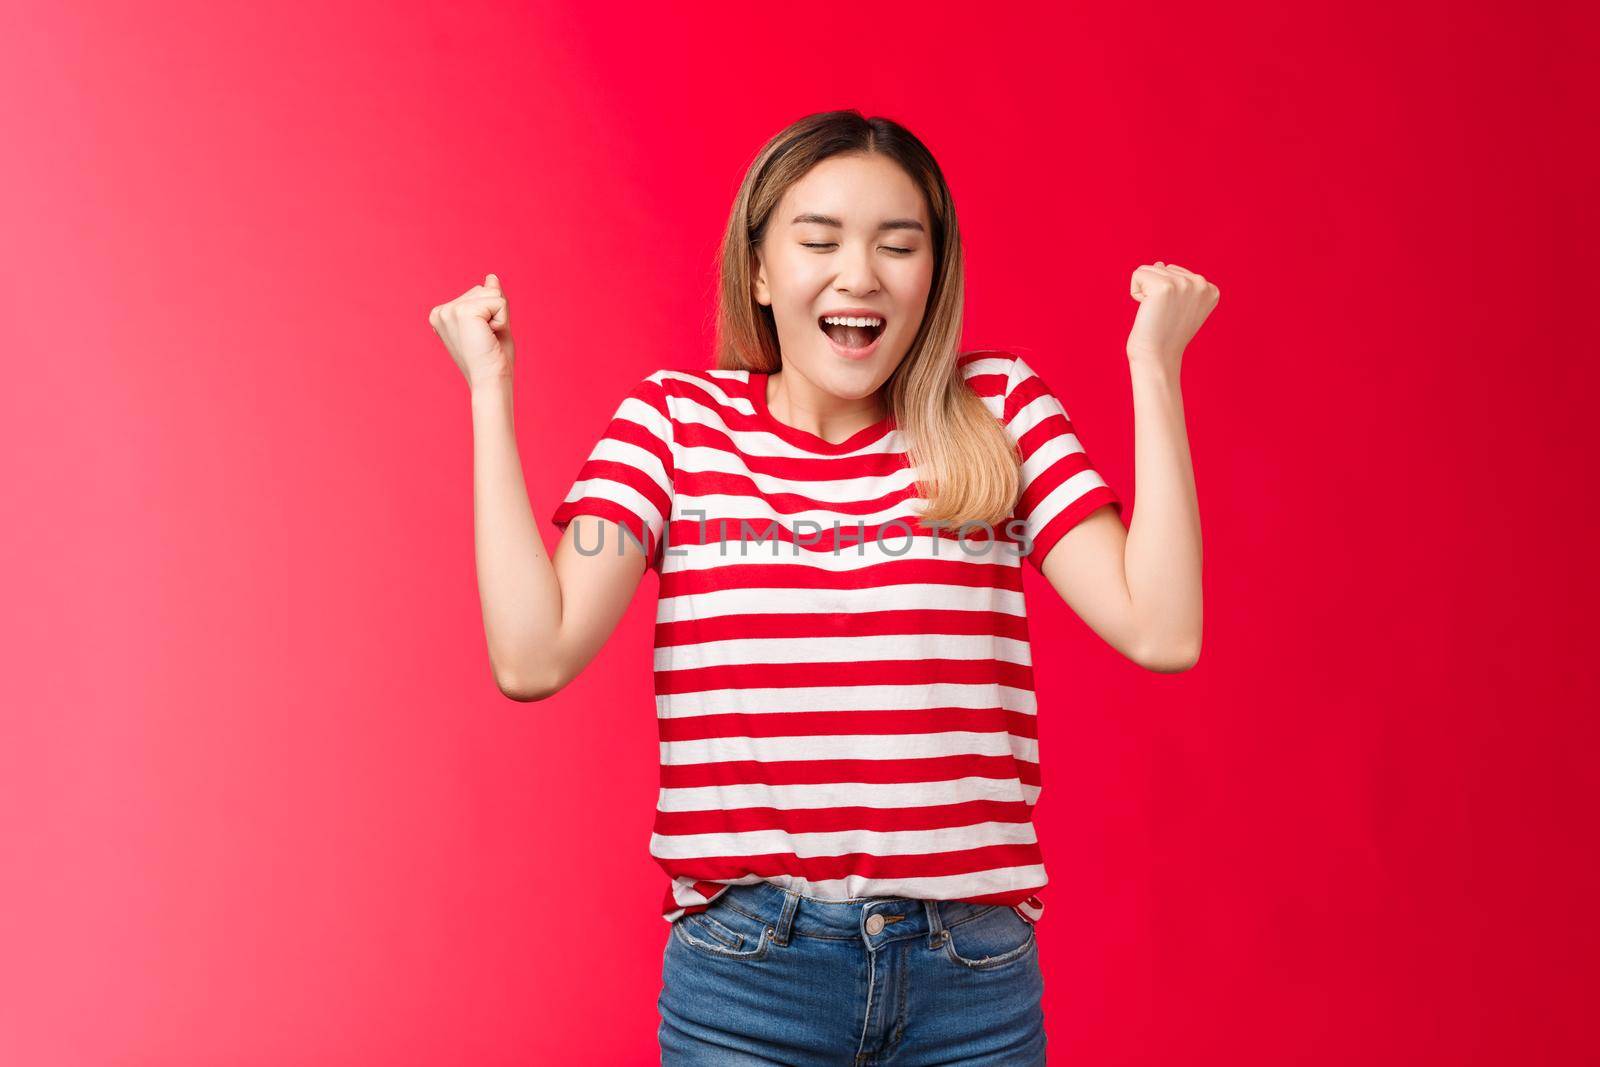 Hooray I did it. Triumphing cute cheerful asian blond girl make fist pumps closed eyes happy broad smile, celebrating accomplishment feel satisfaction finally winning achieve success red background.